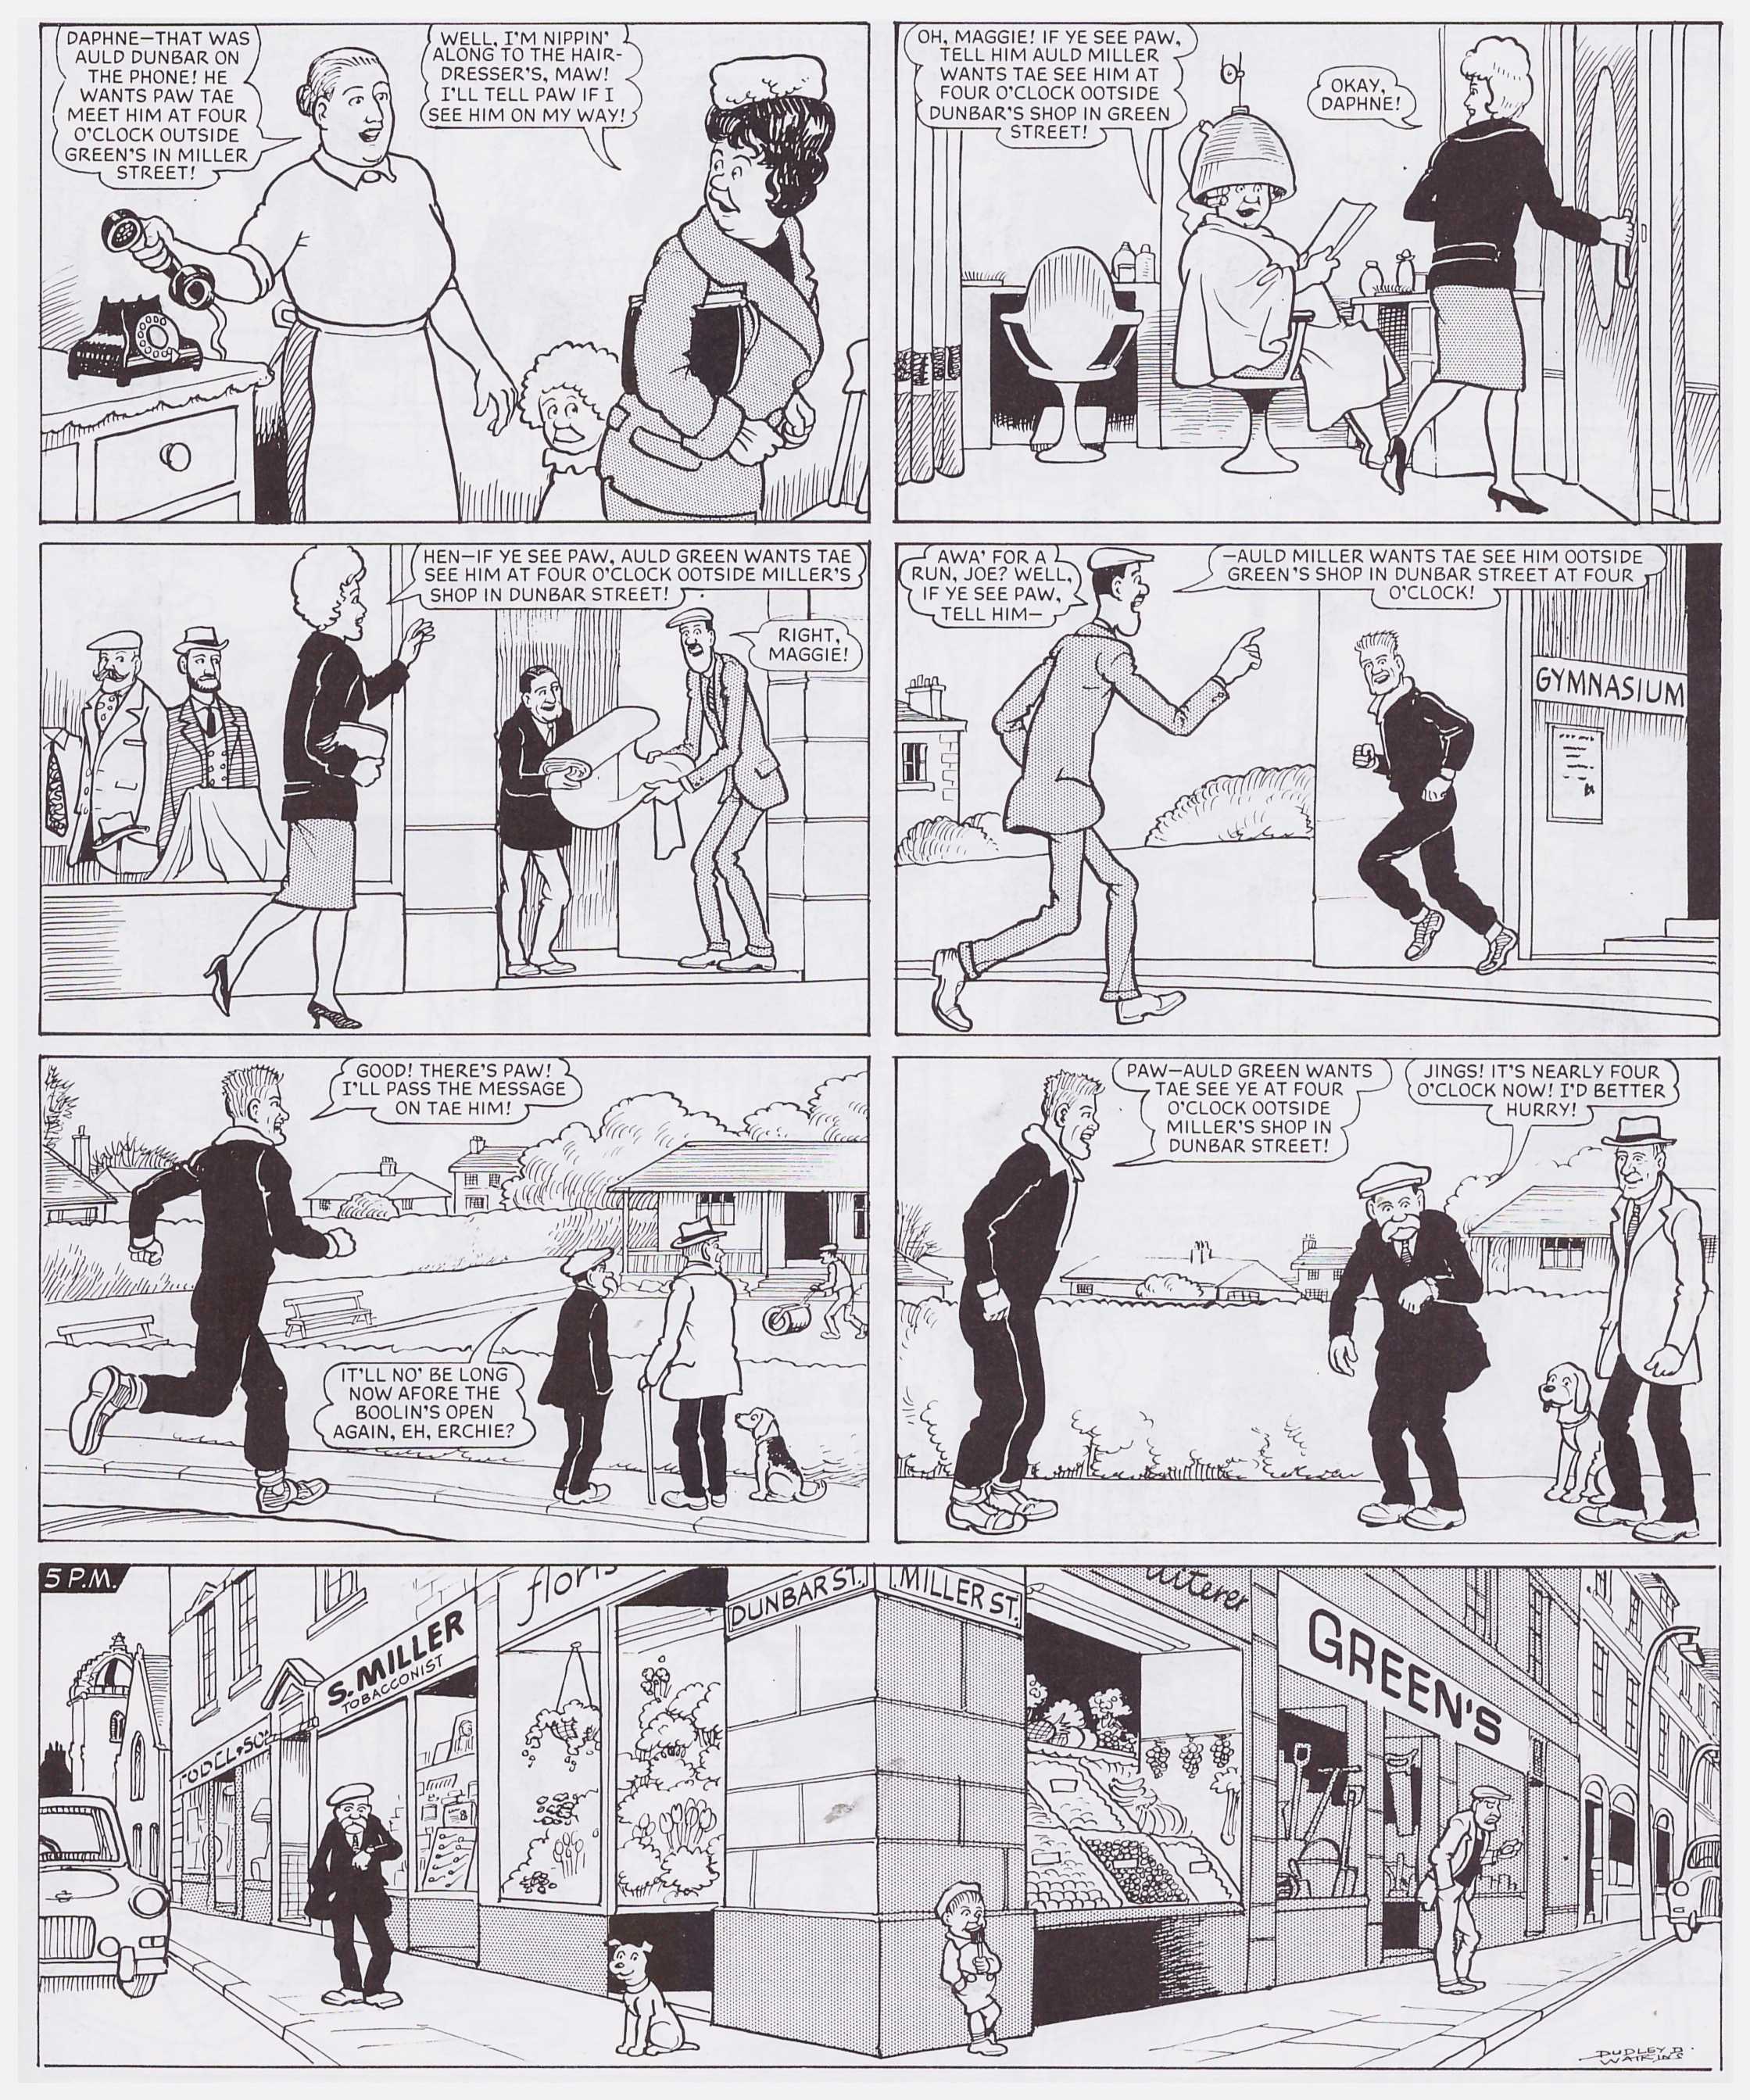 Broons and Oor Wullie The Sensational Sixties review